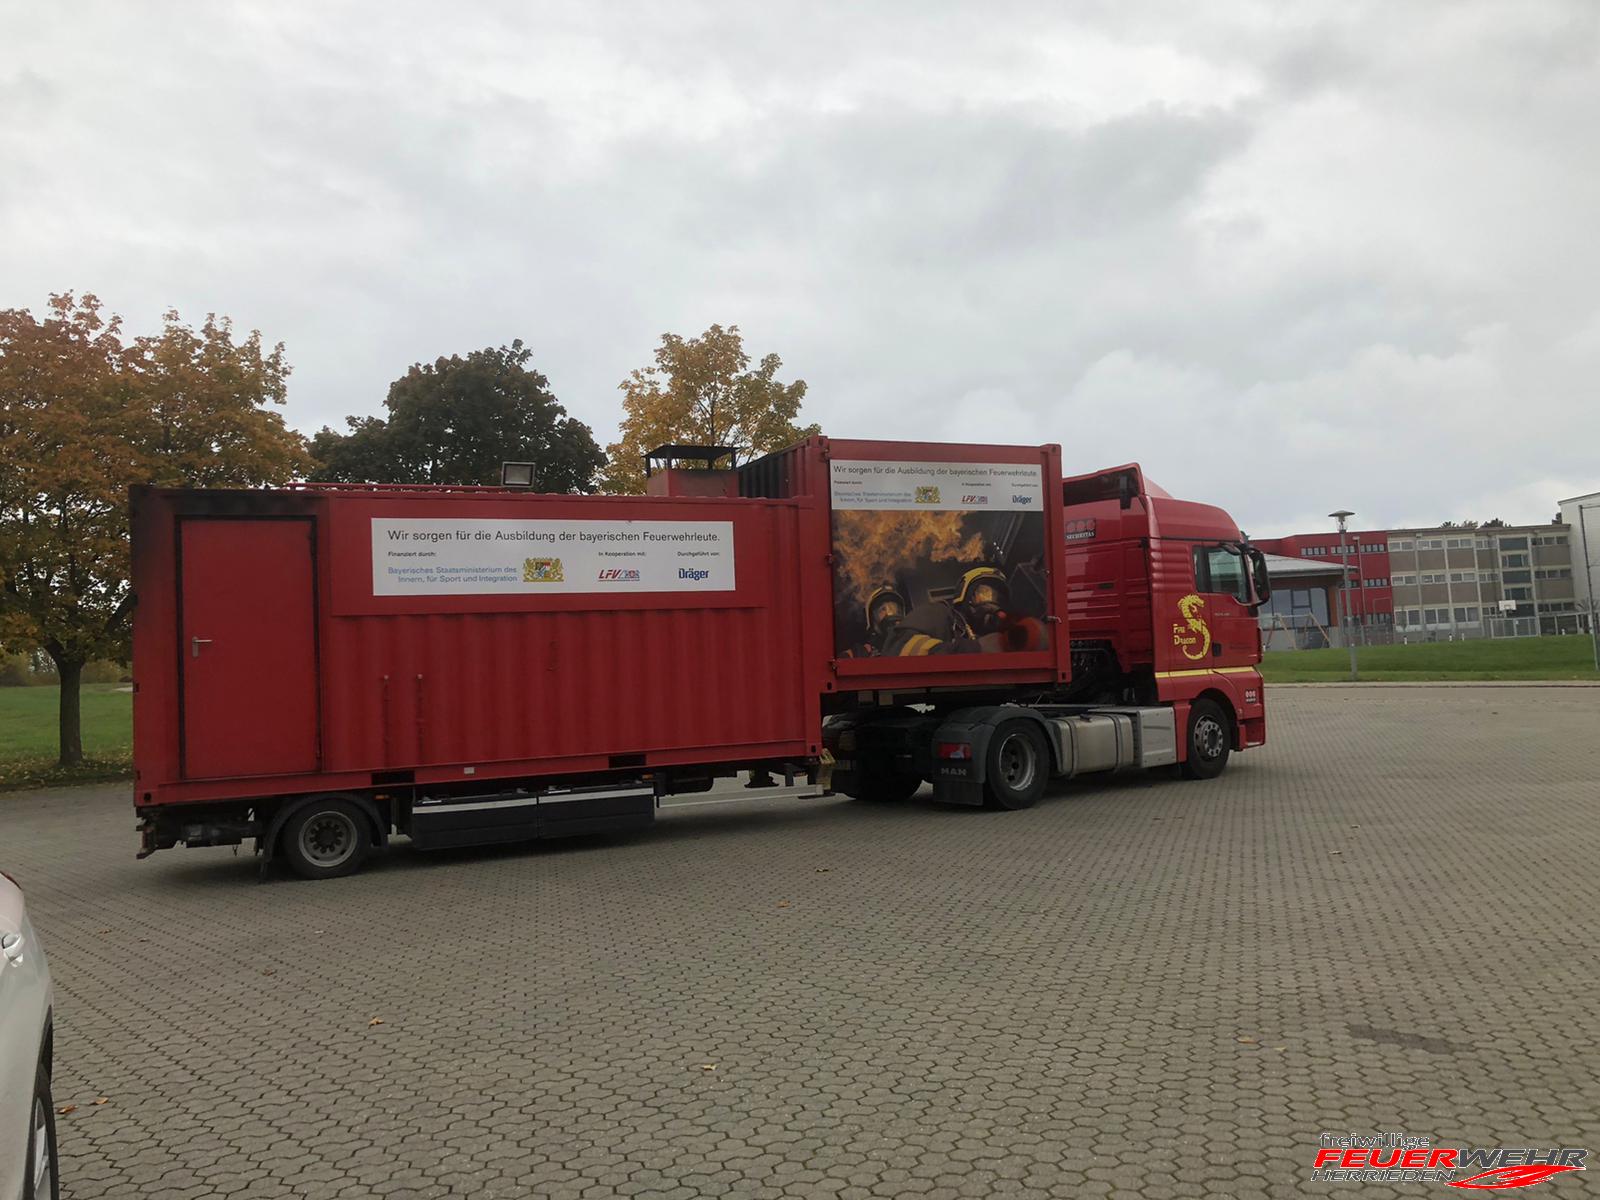 Read more about the article Brandübungscontainer 2020 in Schopfloch